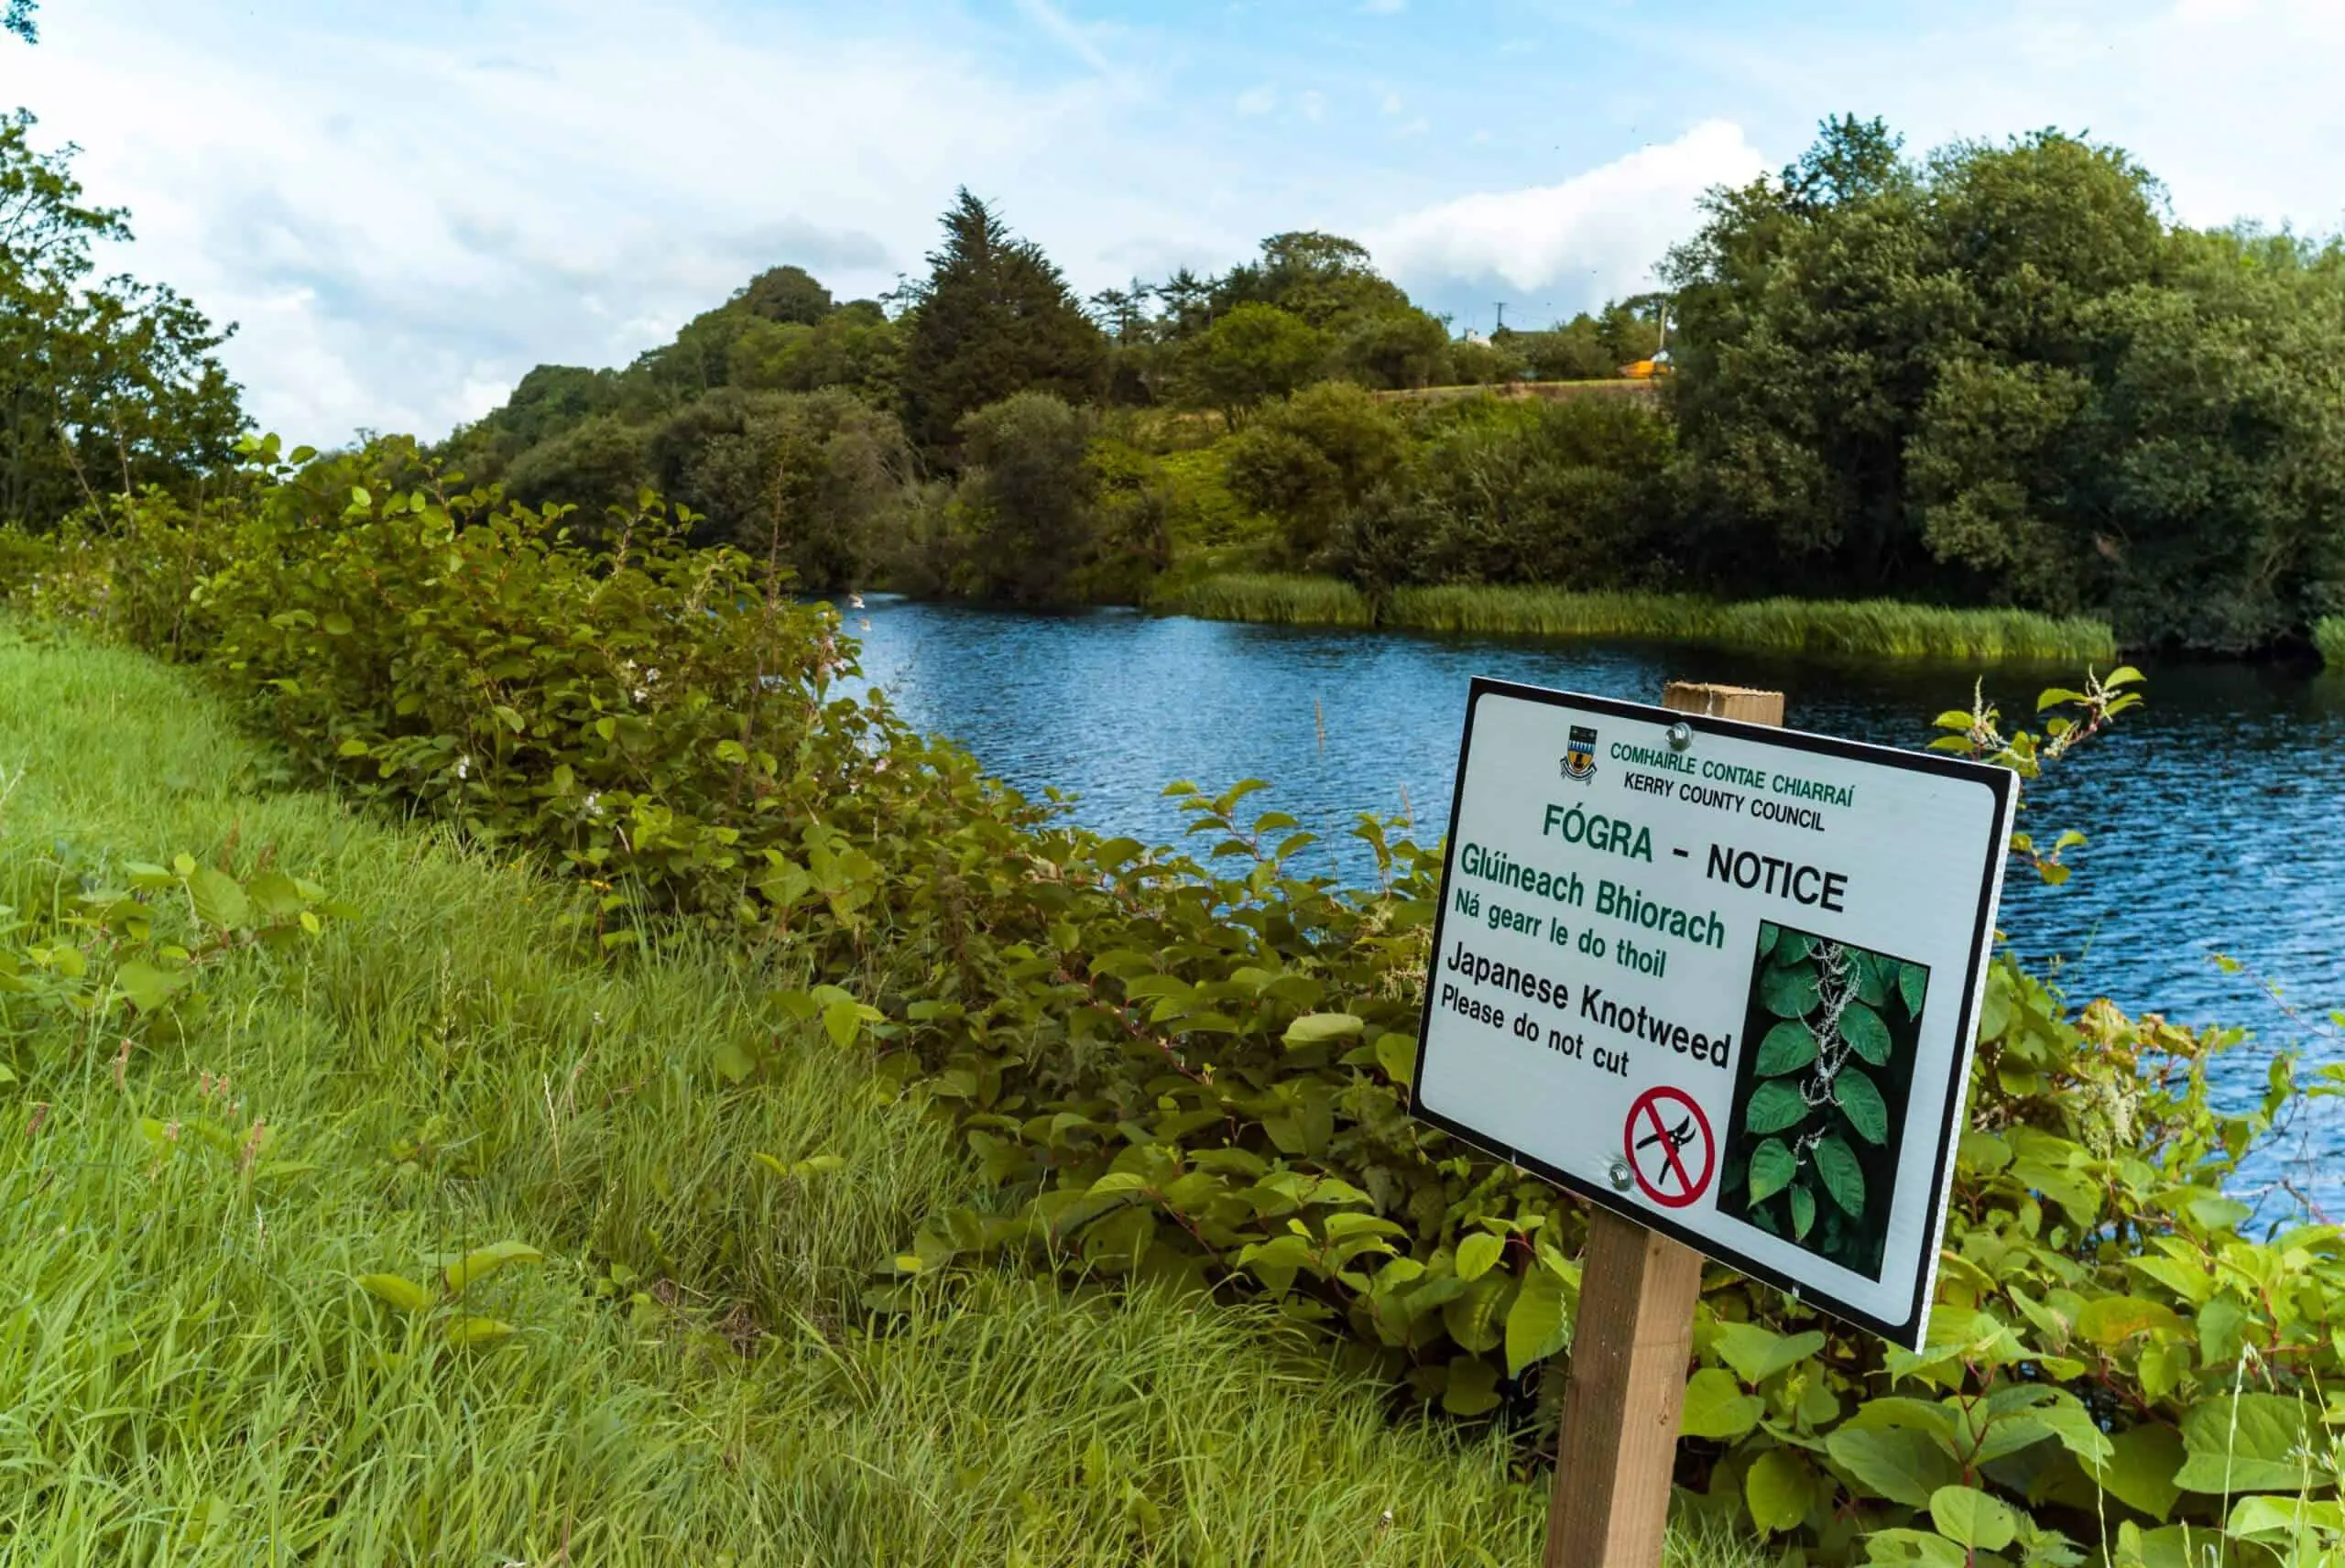 Waterways suffer from this invasive weed - Knotweed Removal